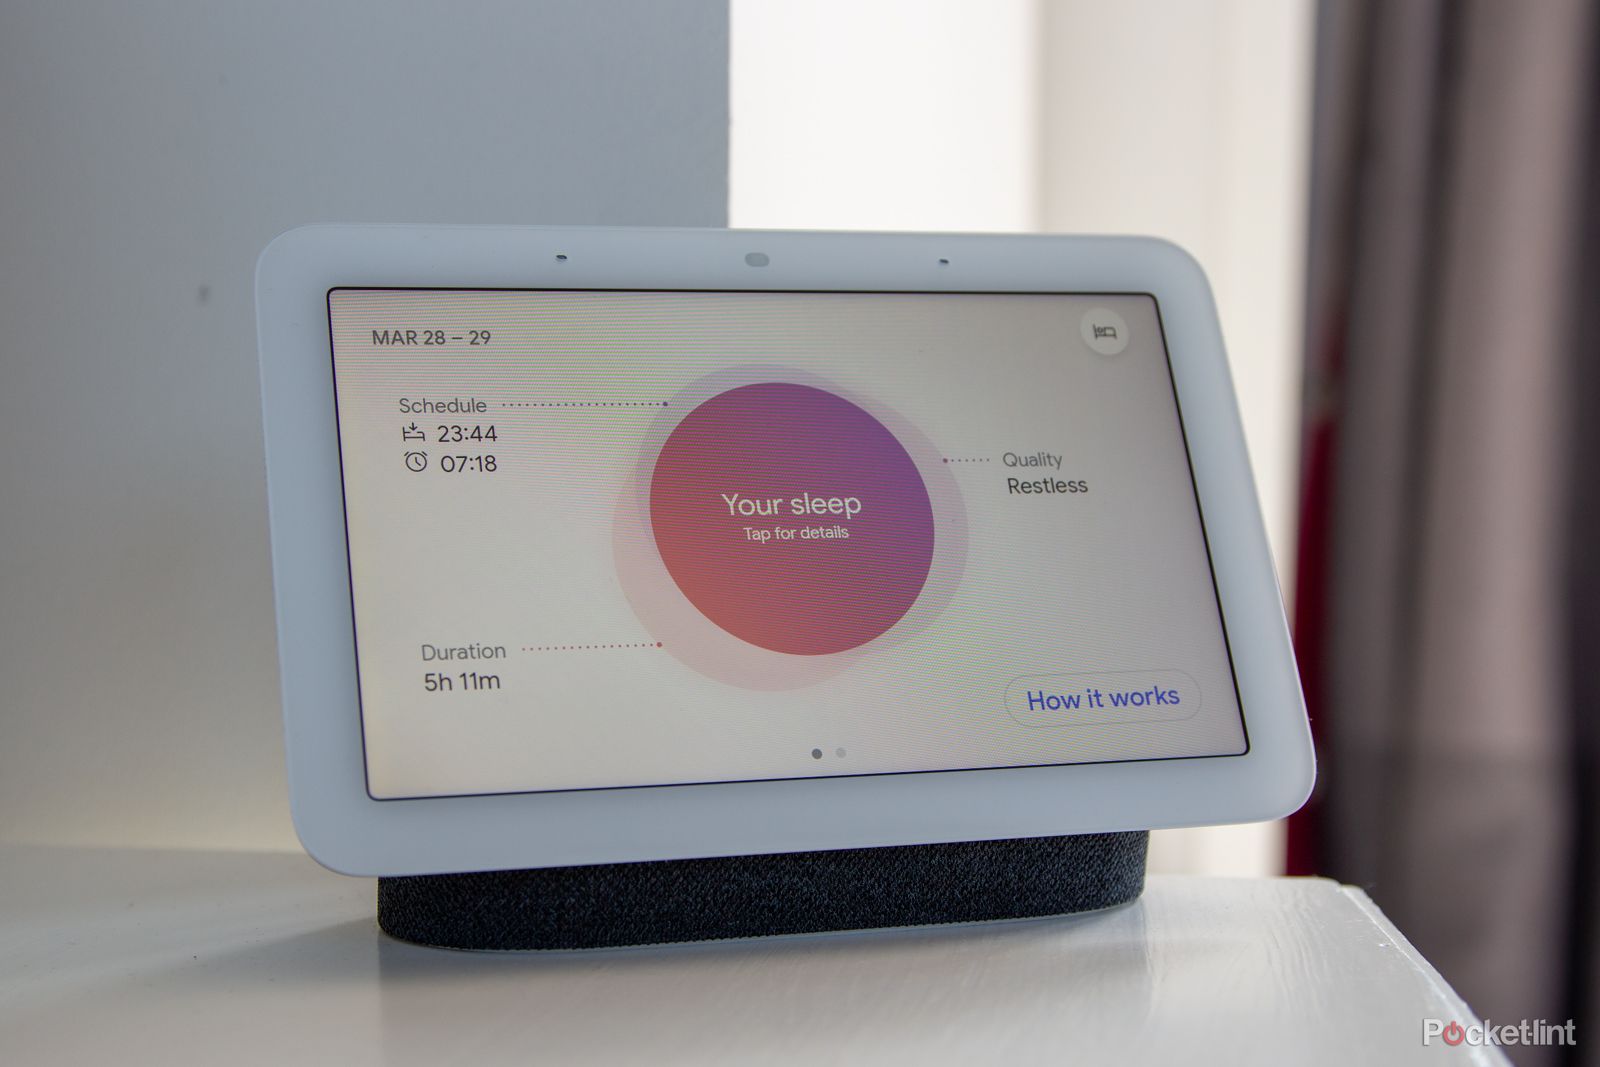 Nest Hub now finally shows date, time, weather concurrently - 9to5Google